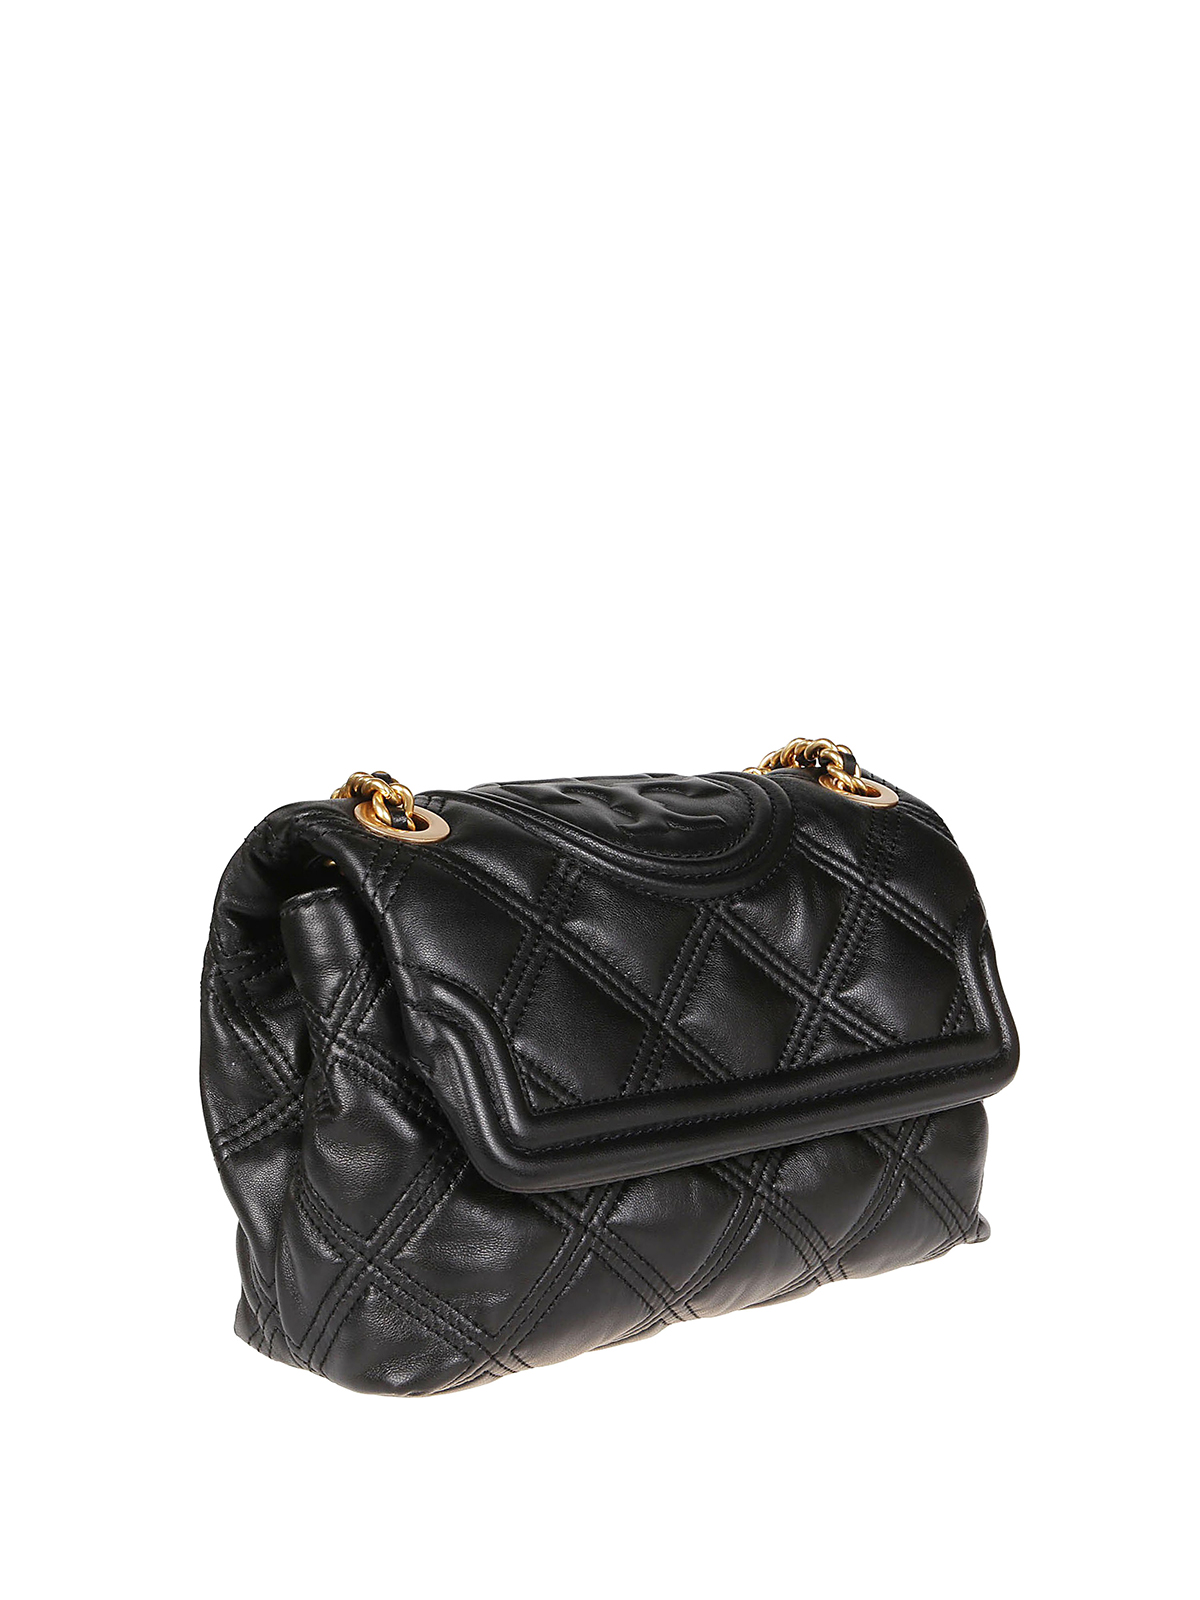 soft leather bags online